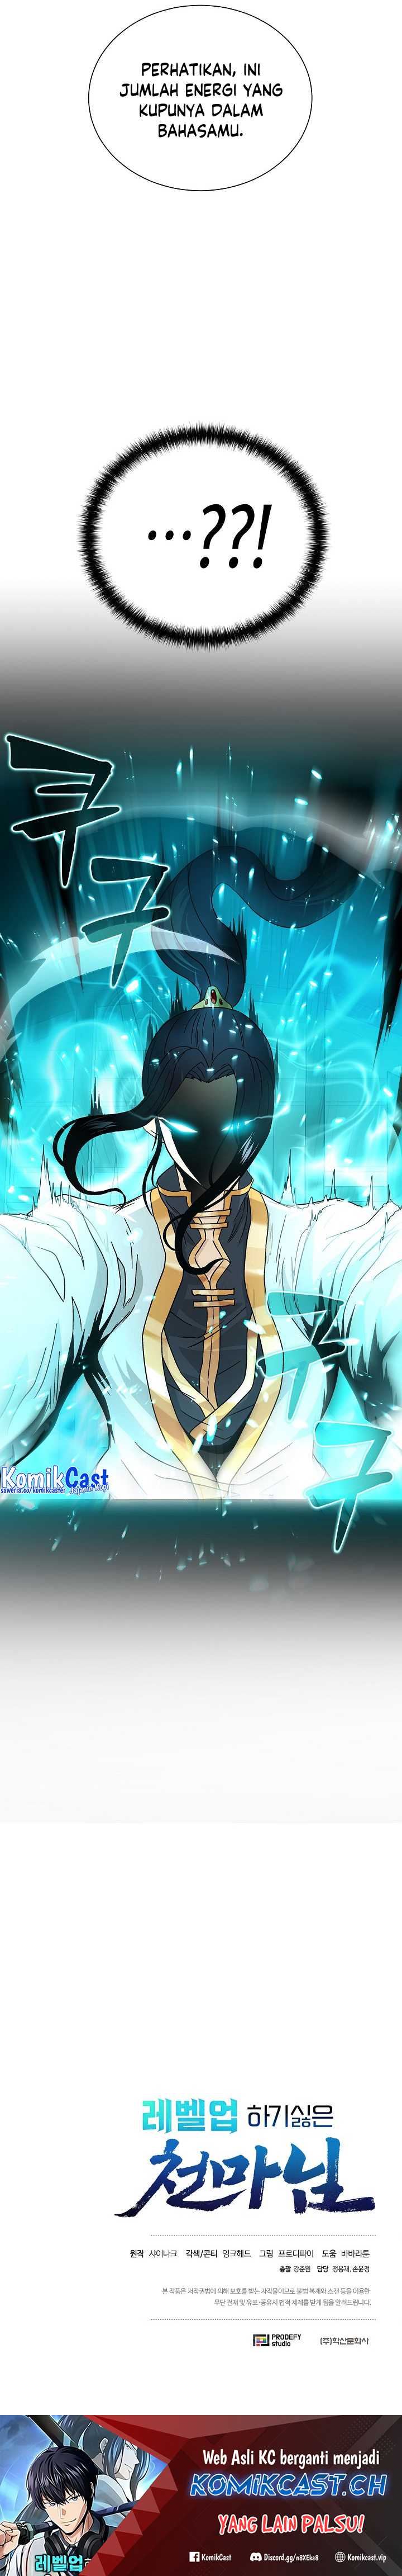 The Heavenly Demon Lord Who Doesn’t Want to Level Up Chapter 01